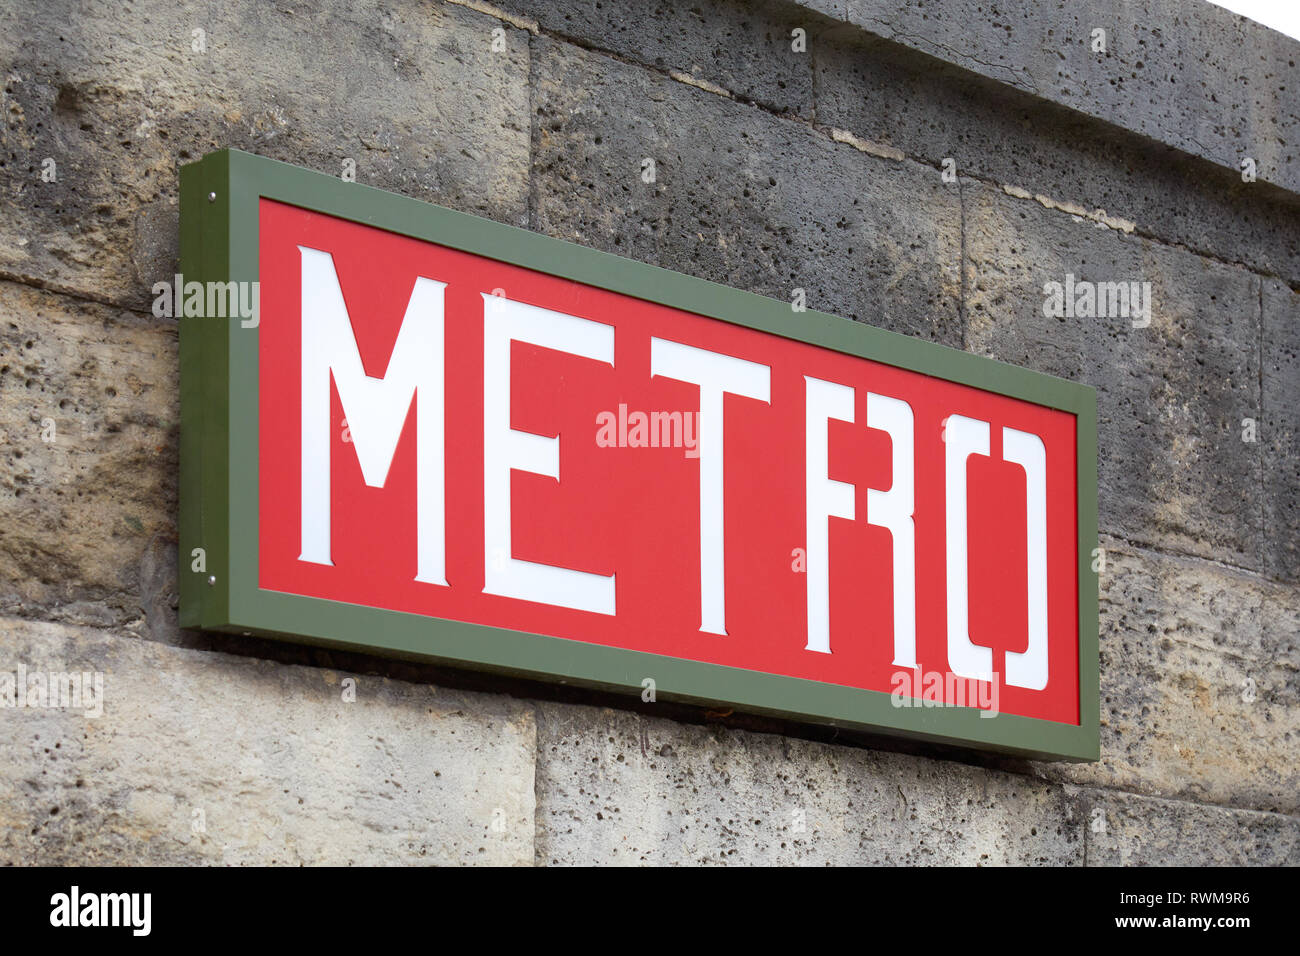 PARIS, FRANCE - JULY 22, 2017: Metro sign red and green on wall in Paris, France. Stock Photo